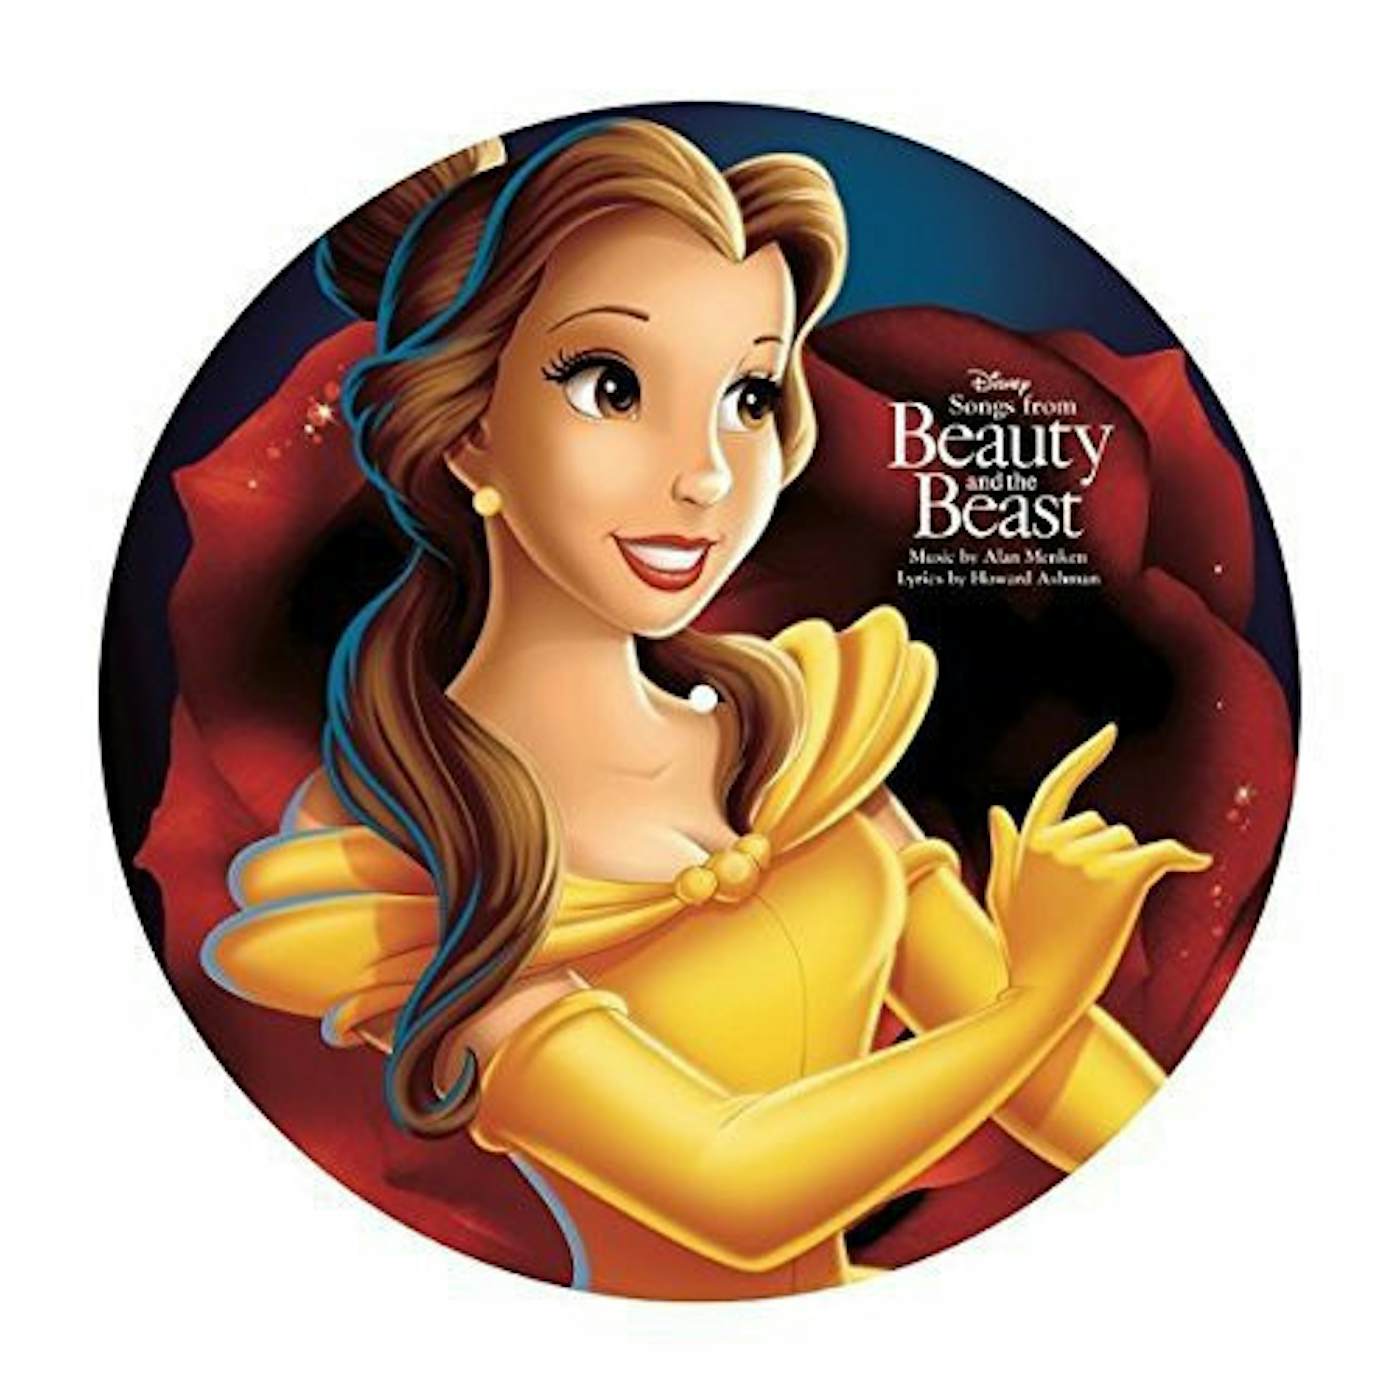 SONGS FROM BEAUTY & THE BEAST / Original Soundtrack Vinyl Record